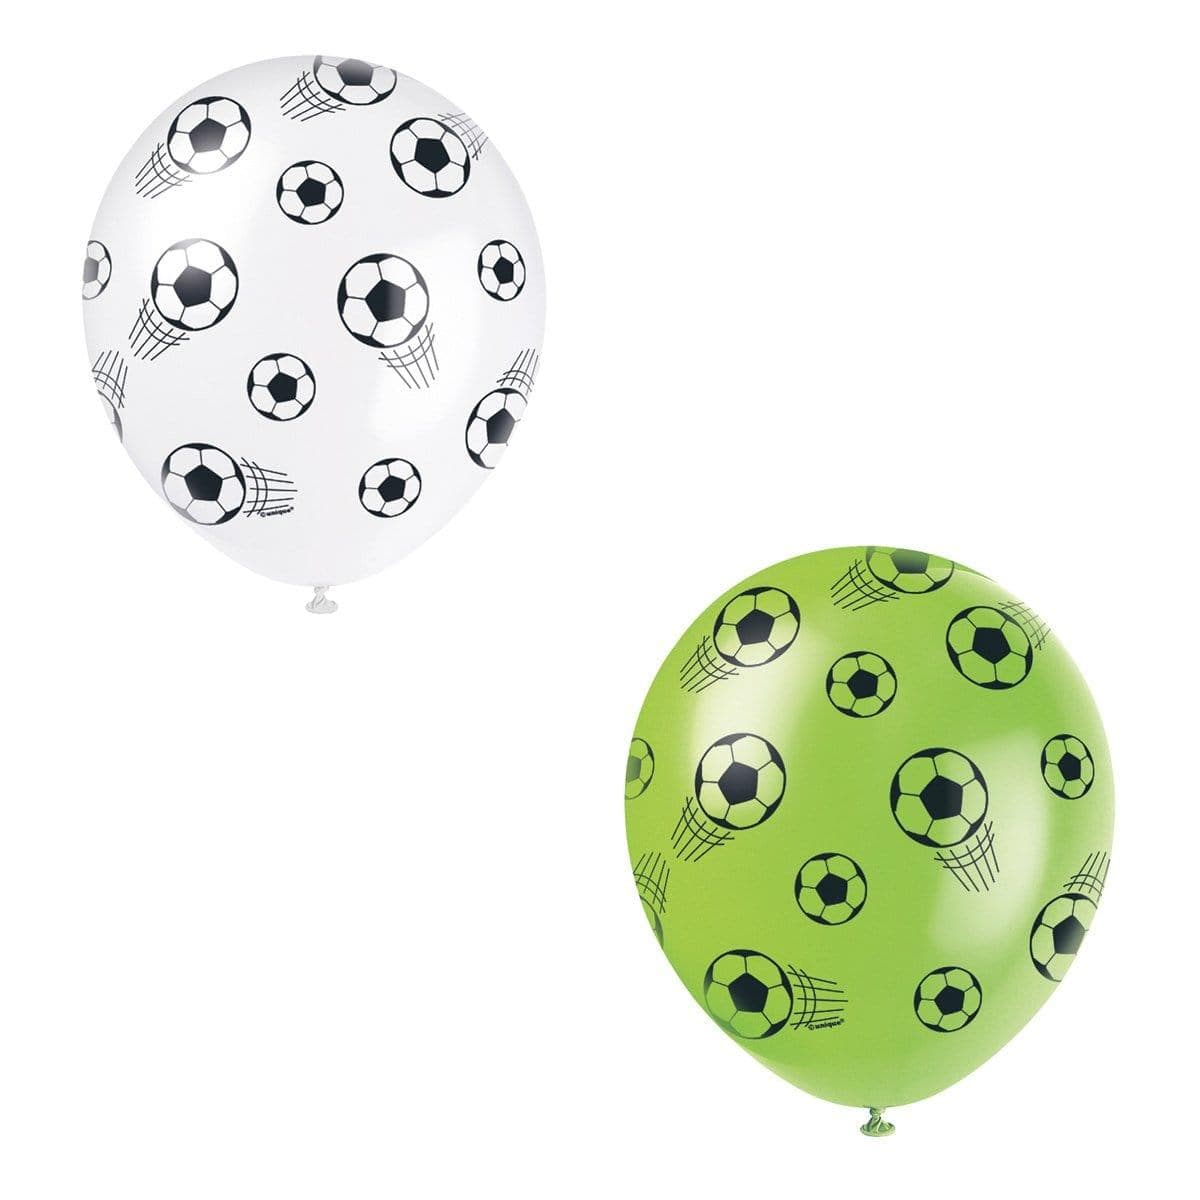 Buy Theme Party 3D Soccer latex balloons 12 inches, 5 per Package sold at Party Expert